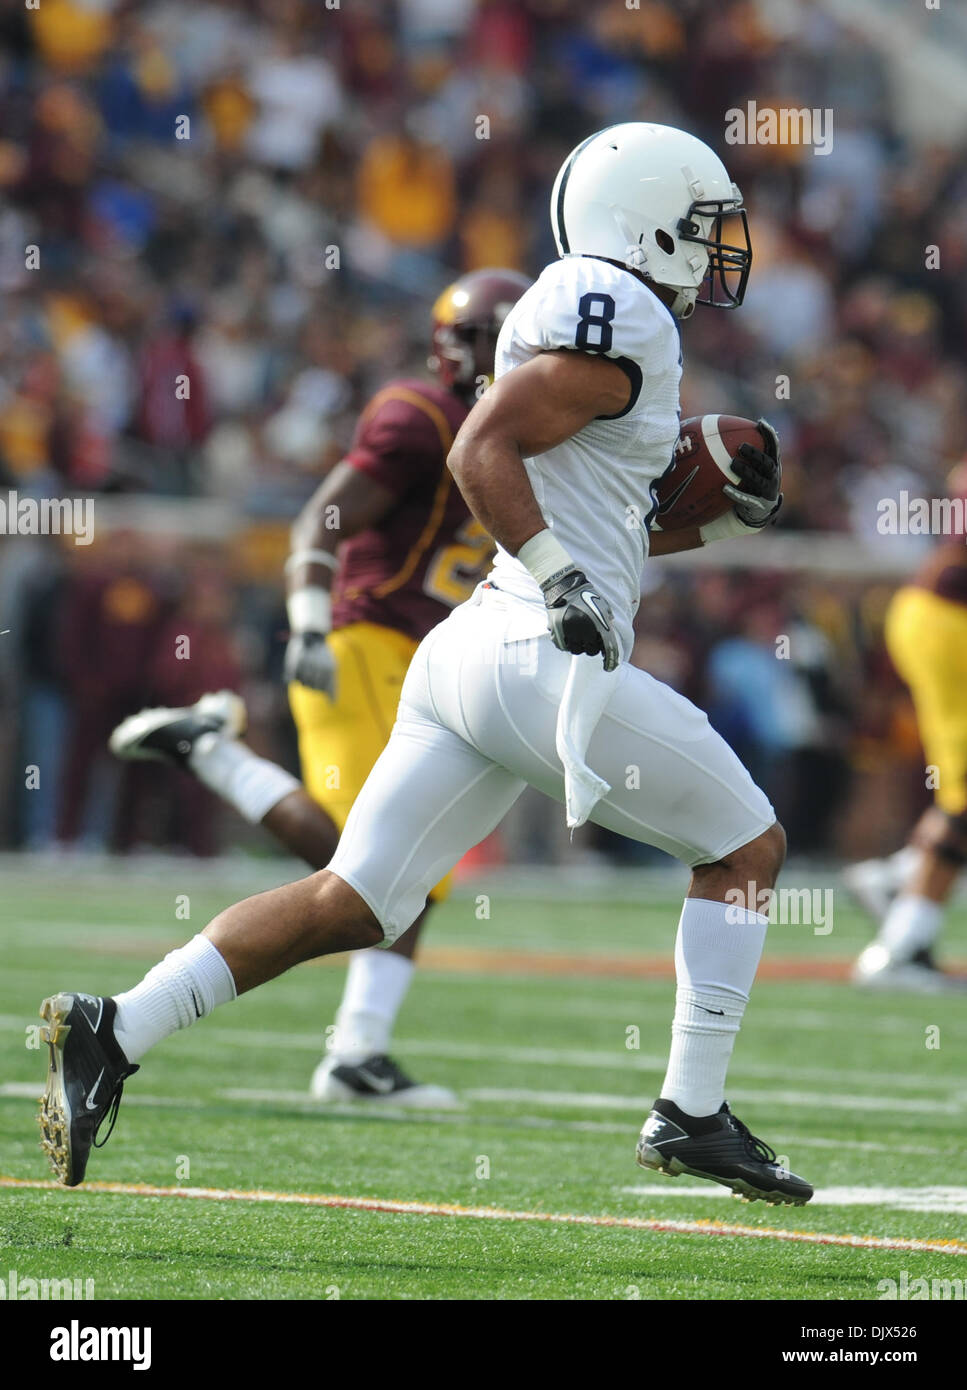 Oct. 23, 2010 - Minneapolis, Minnesota, United States of America -  Penn State University wide receiver Brandon Moseby-Felder (#8) intercepts a pass returning it for 54 yards in the second quarter of the game between the Minnesota Gophers and the Penn State Nittany Lions at the TCF Stadium in Minneapolis, Minnesota.  Penn State leads Minnesota 21-7 at halftime. (Credit Image: © Mar Stock Photo